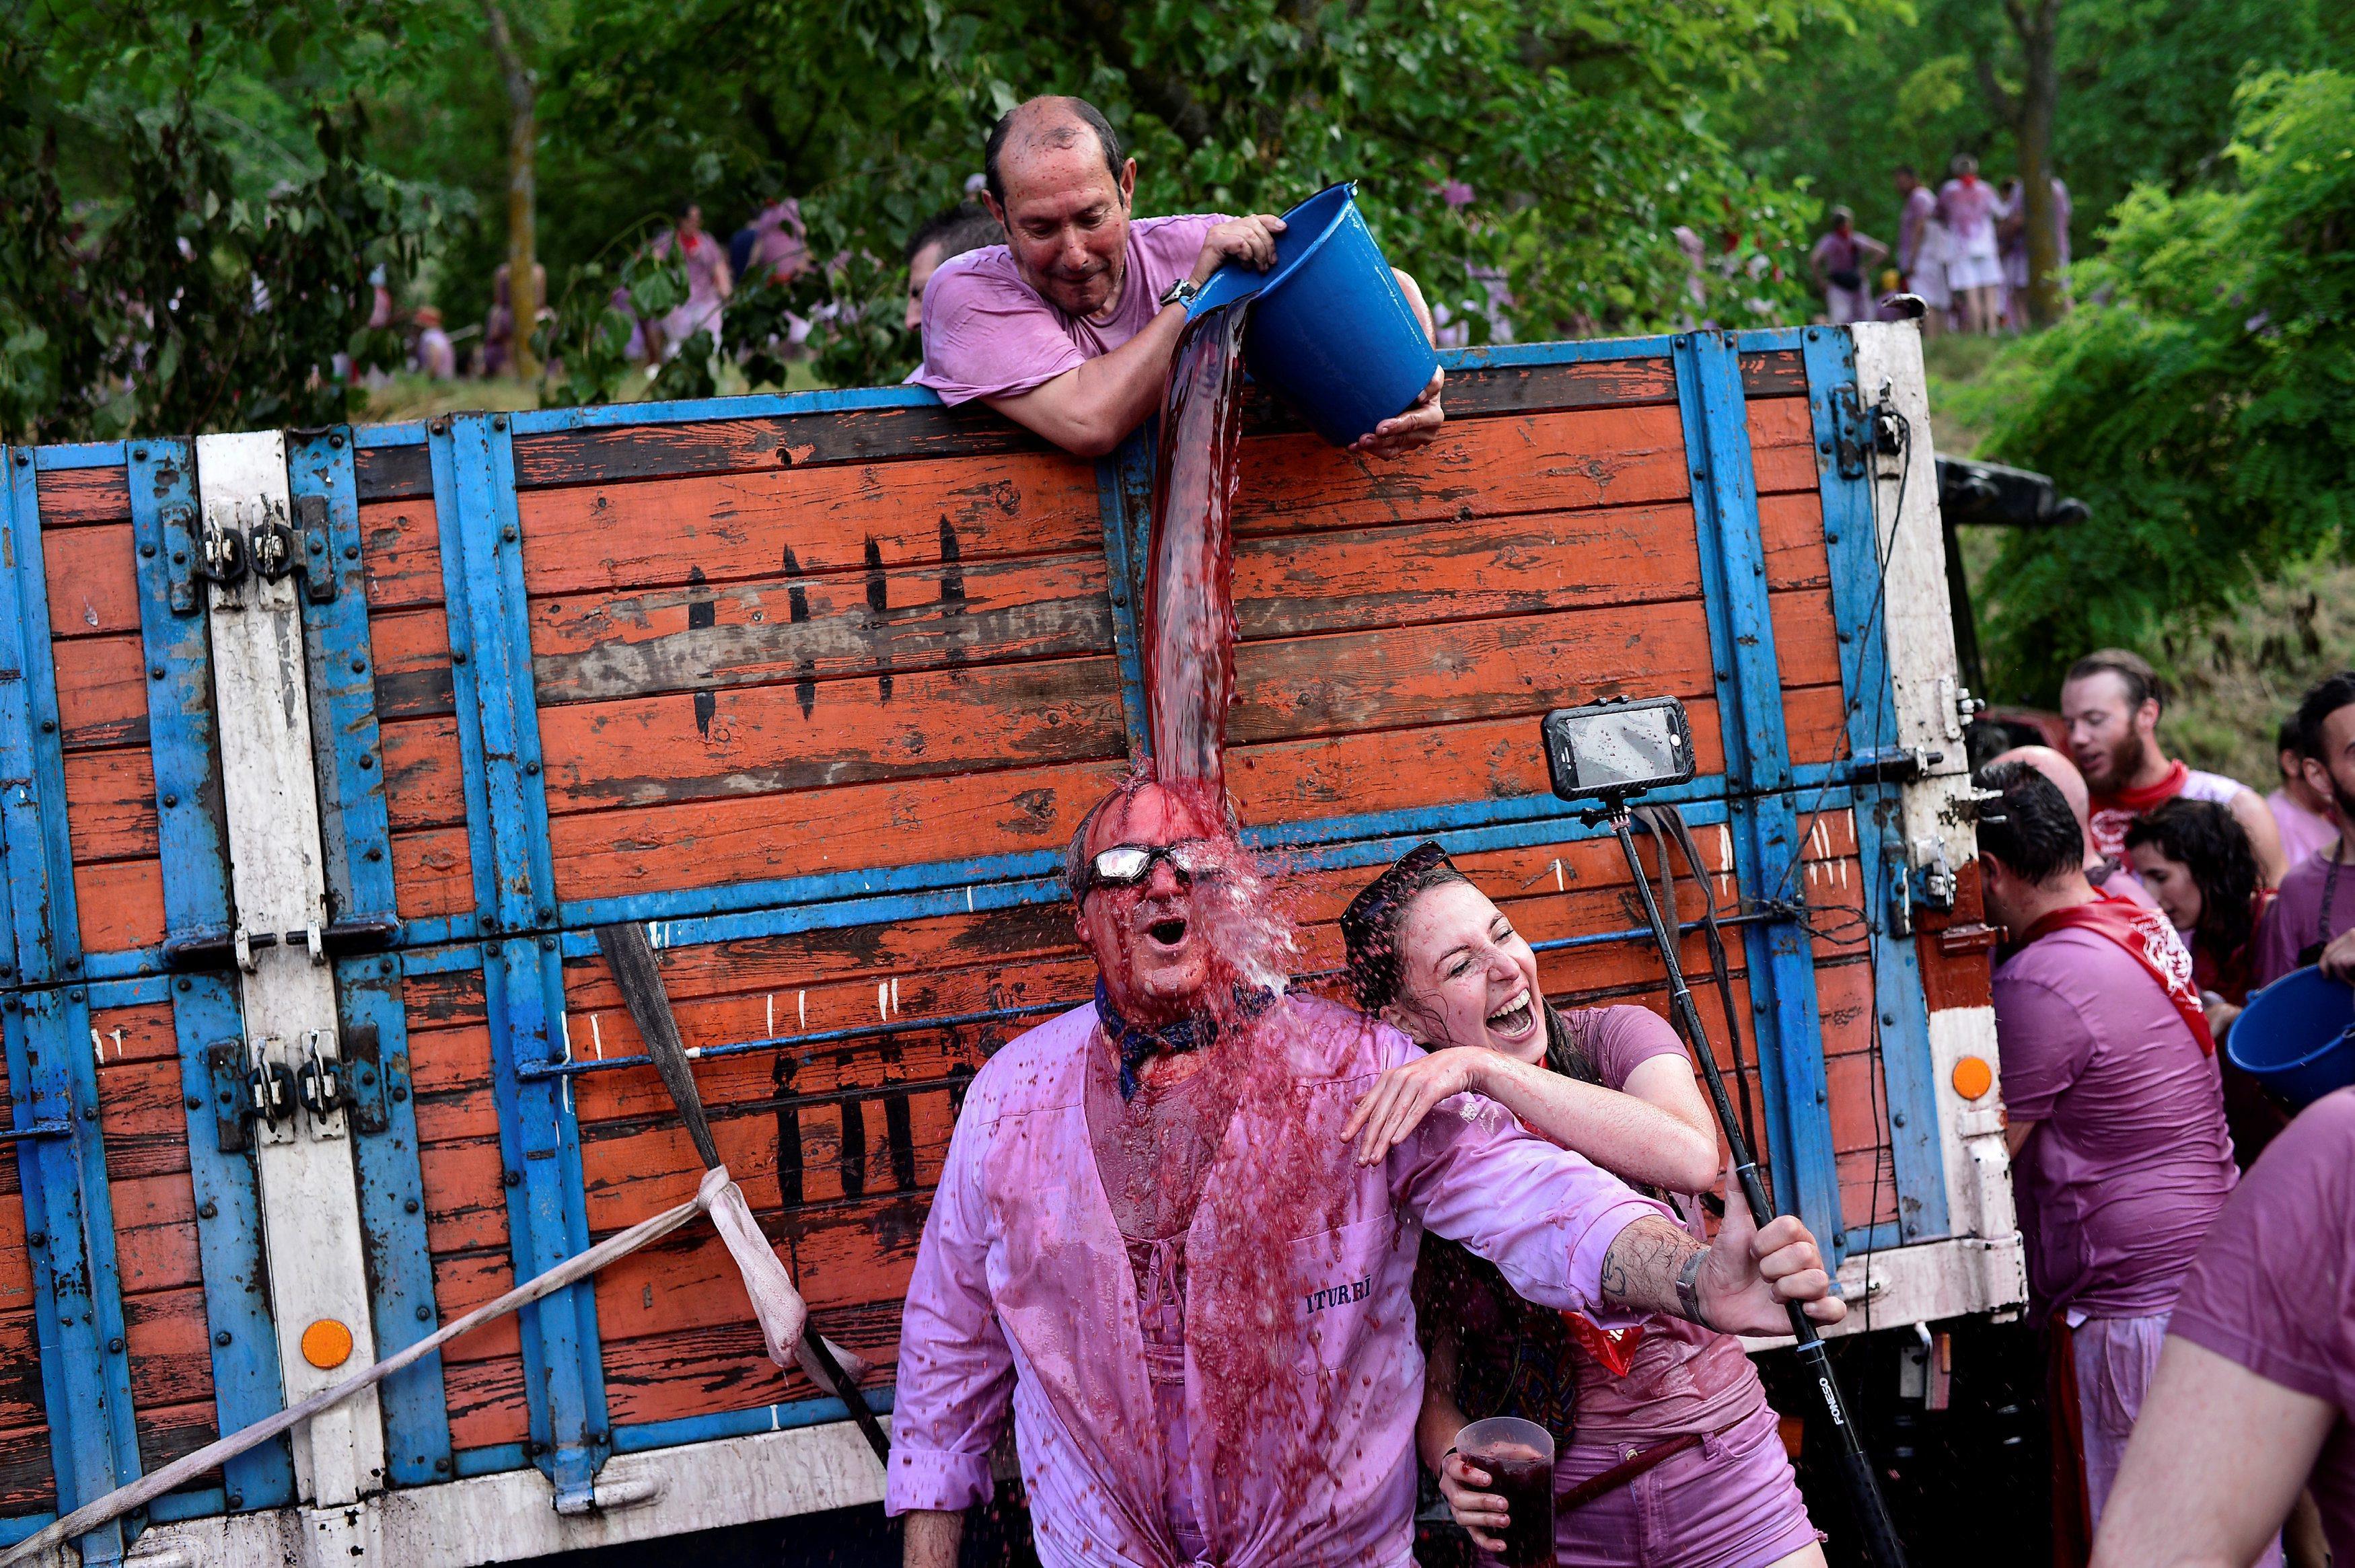 Revellers have wine poured over them during the Batalla de Vino (Wine Battle) in Haro